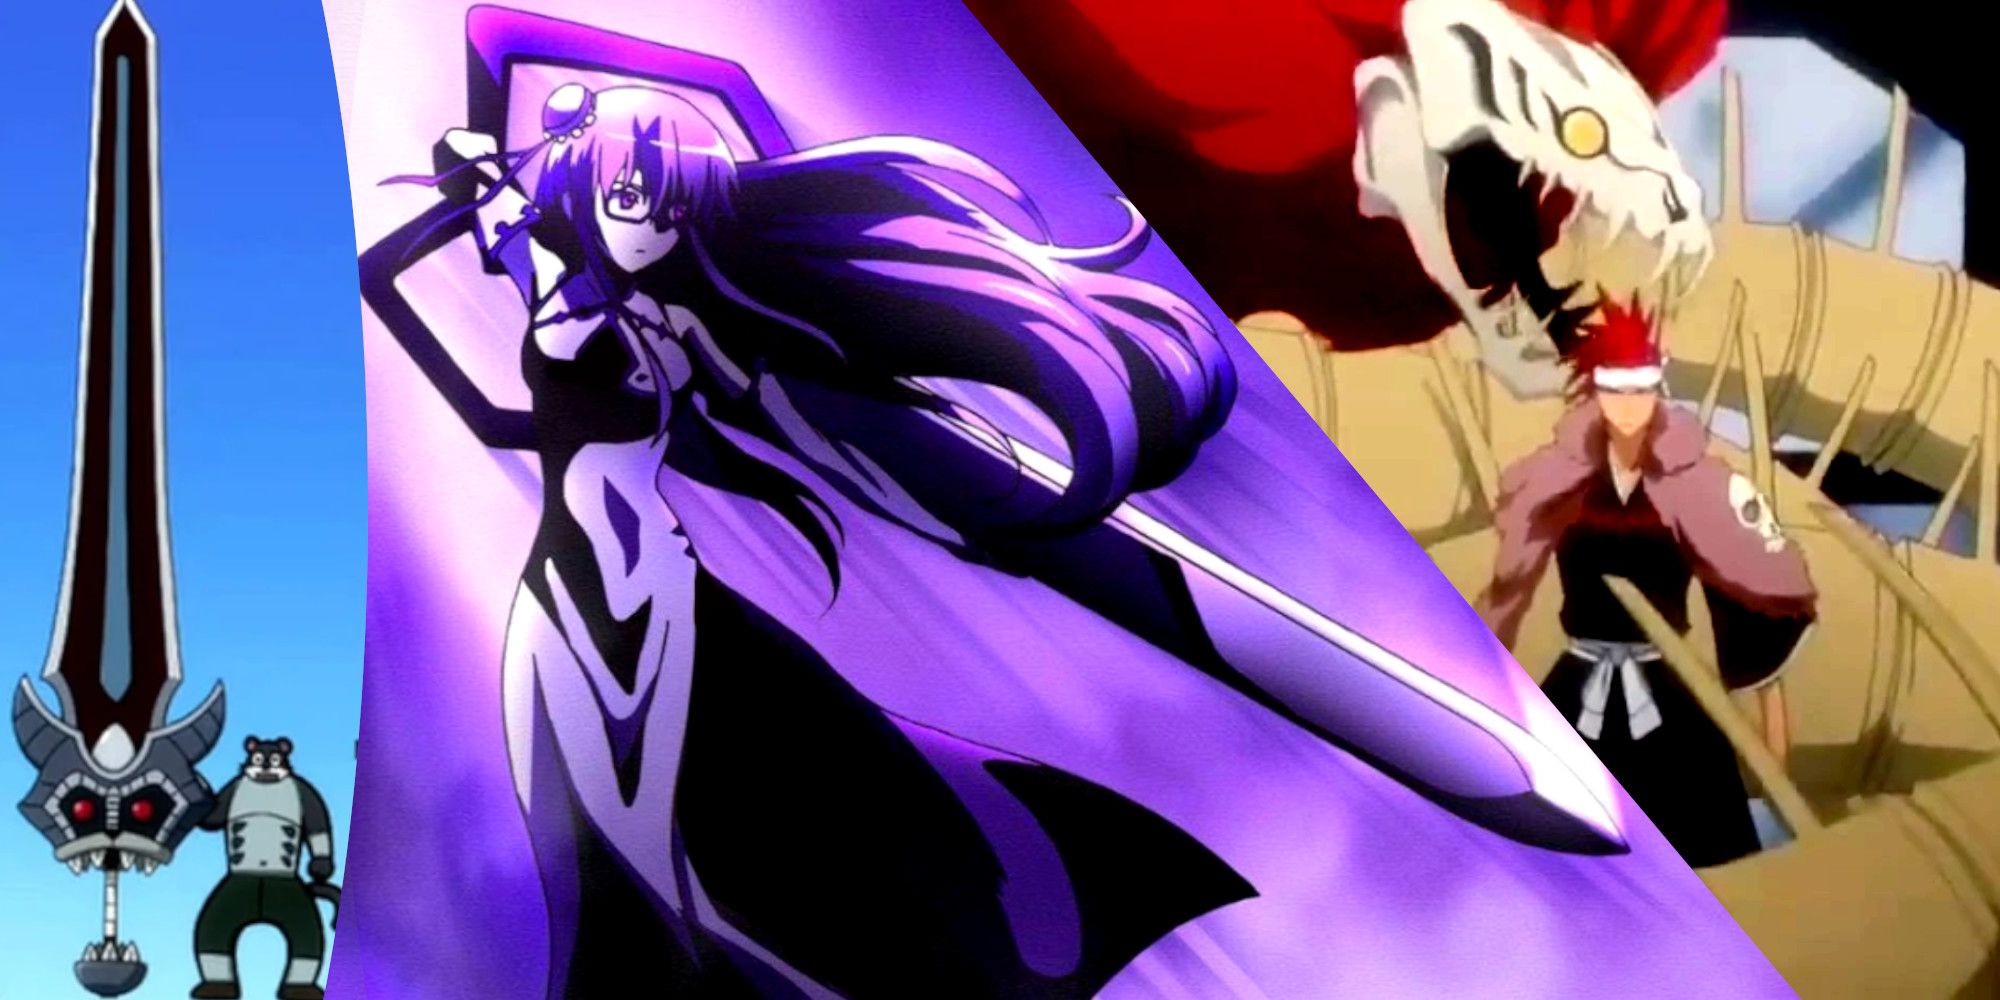 Anime Weapons with Useless Real-life Application Sheere's Cutter of Creation: Extase (Akame Ga Kill!) Renji Abarai's Soo Zabimaru (Bleach) Panther Lily's Bustermarm Sword (Fairy Tale)